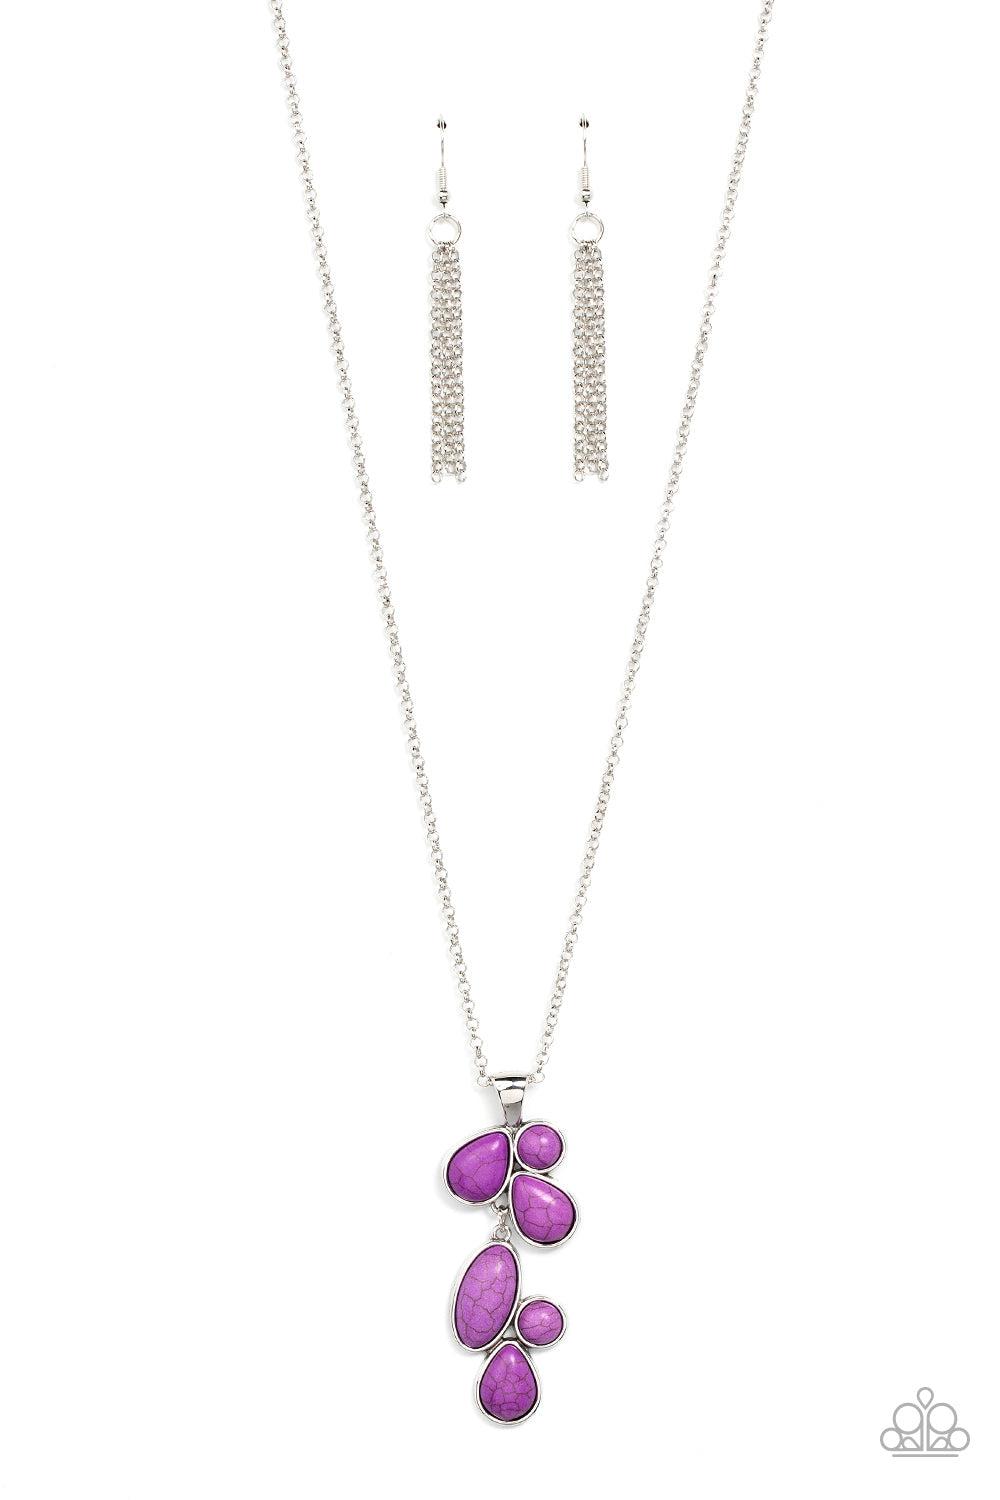 Wild Bunch Flair Purple Stone Necklace - Paparazzi Accessories- lightbox - CarasShop.com - $5 Jewelry by Cara Jewels